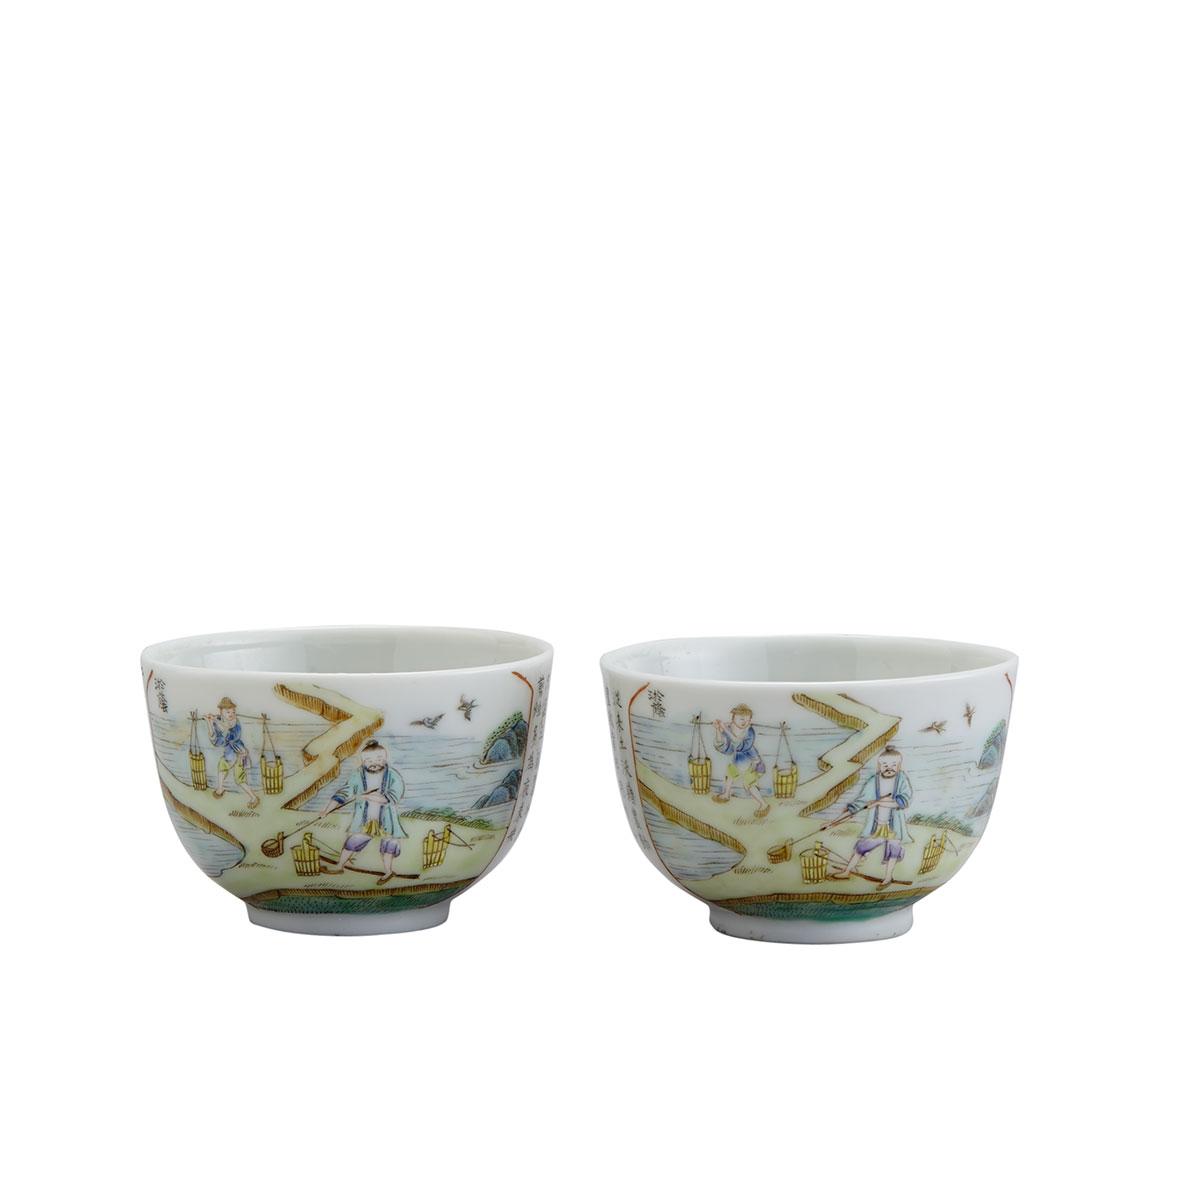 Pair of Famille Rose Wine Cups, Daoguang Mark, Republican Period